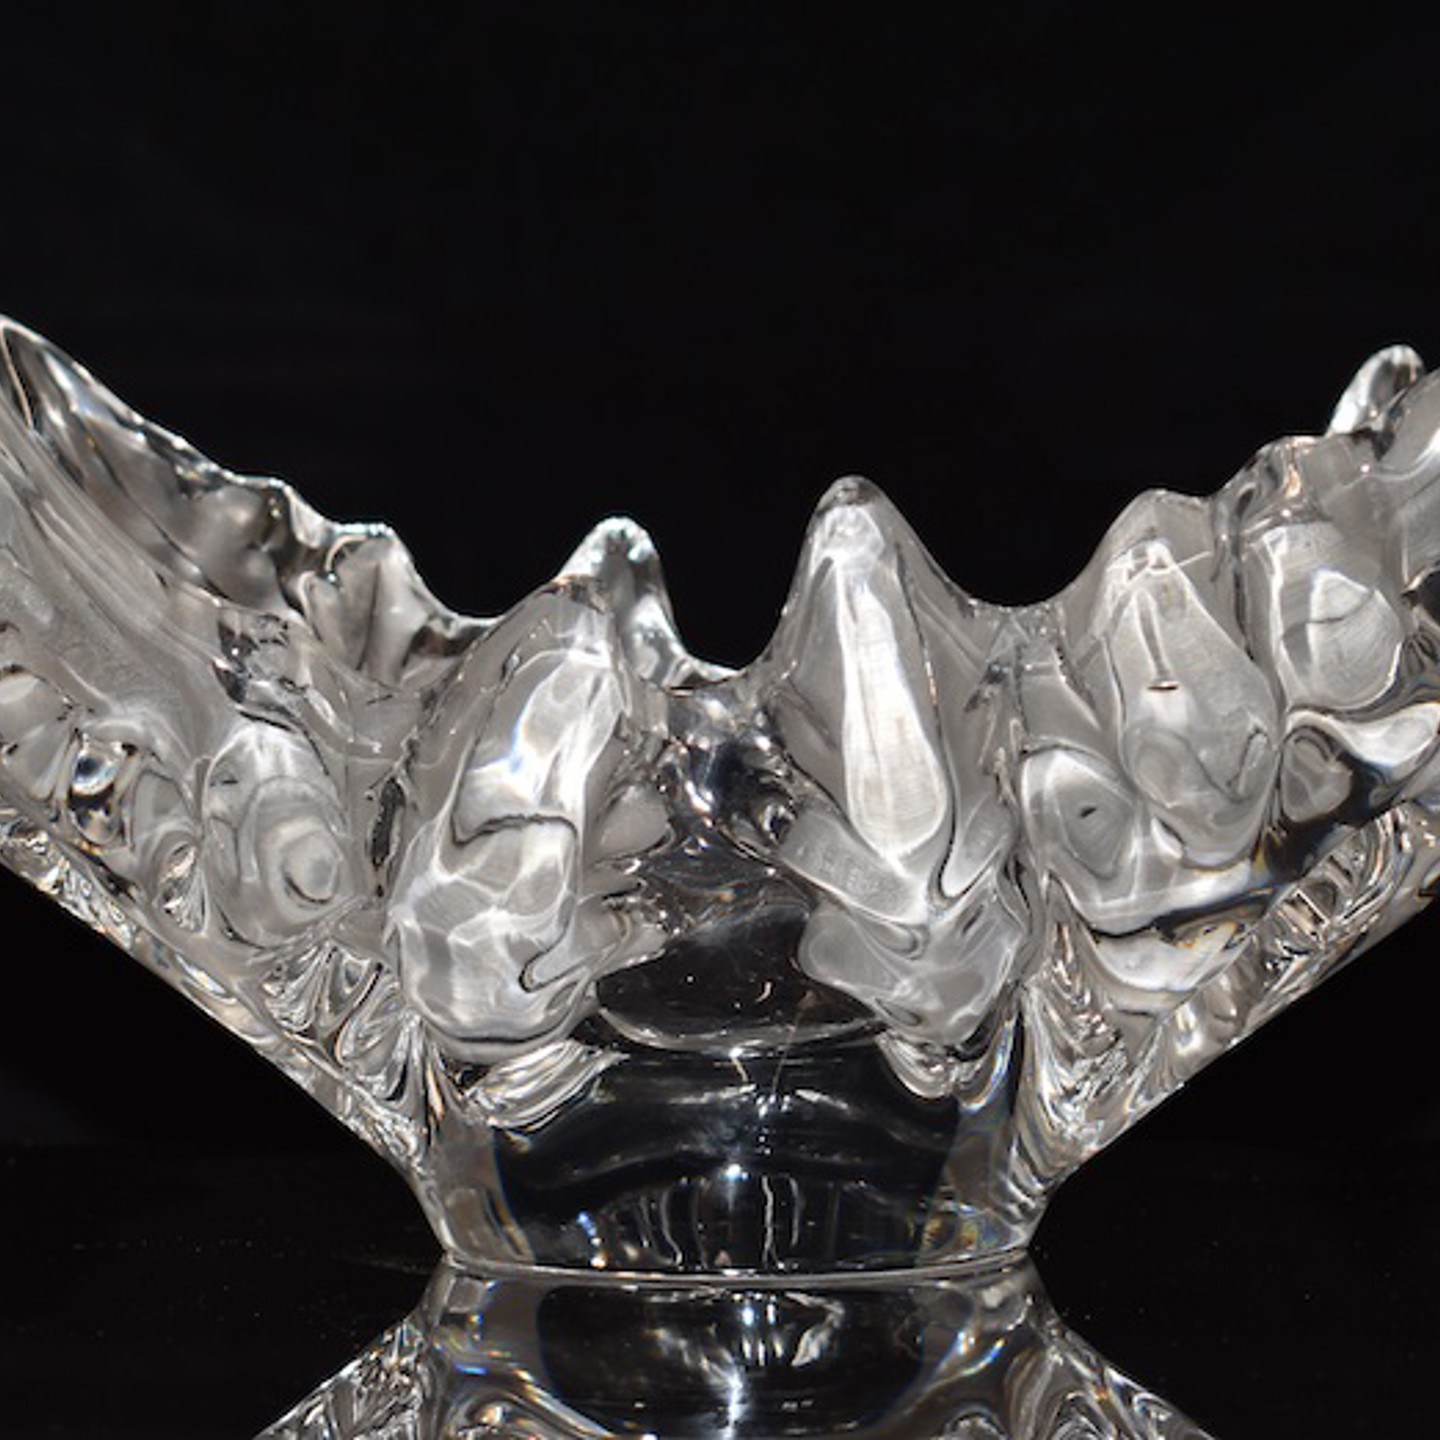 Lalique Champs LysEs Clear And Frosted Glass Centrepiece Bowl With Moulded Leaf Decoration, Signed To Base 'Lalique France', HAMMER 1,000